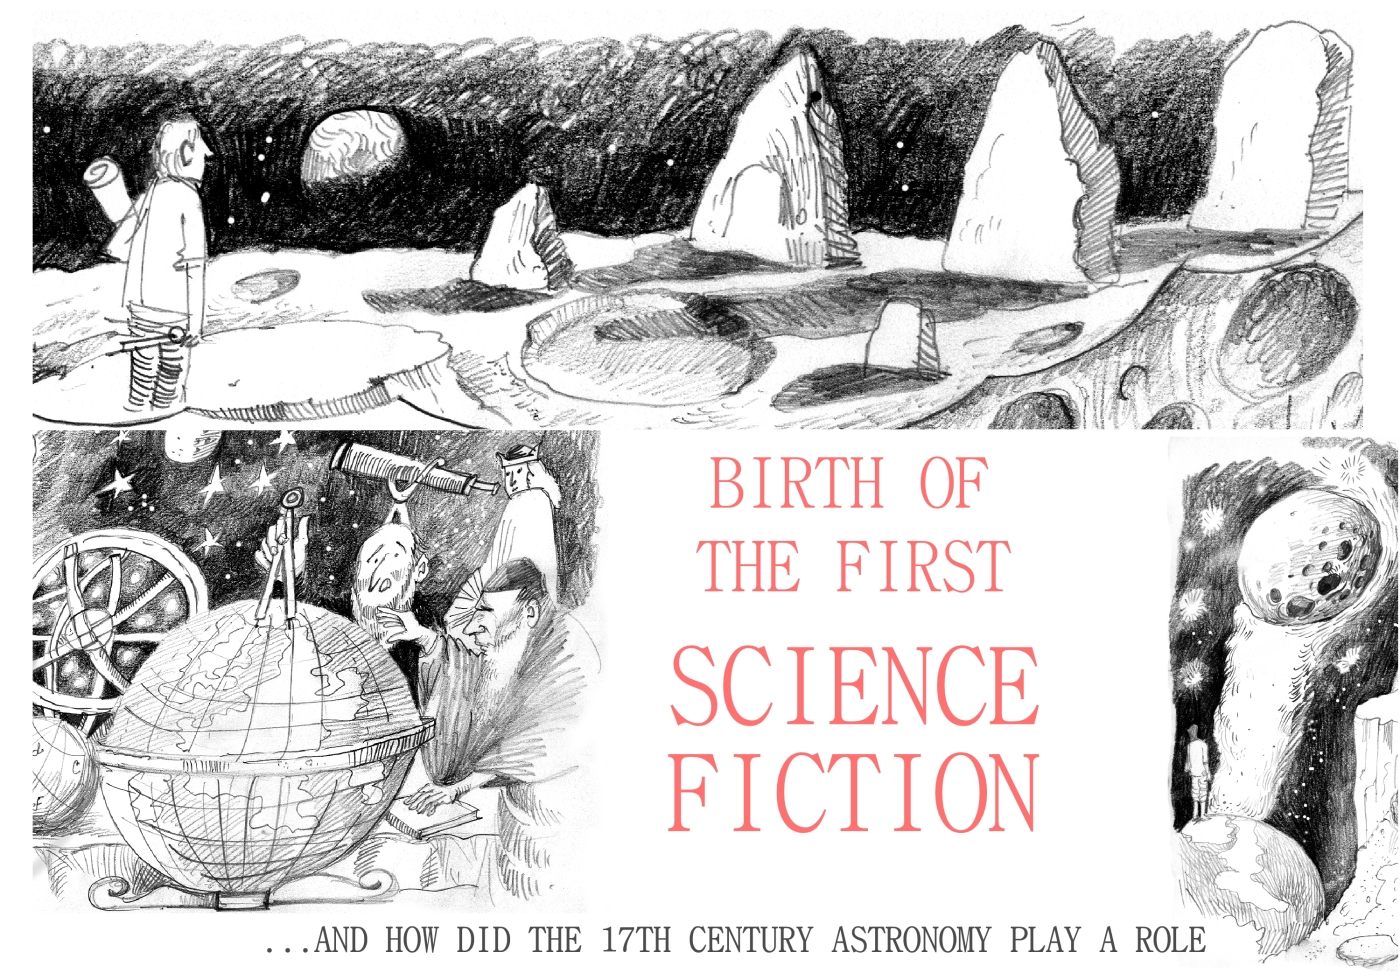 Birth of the 'First Science Fiction' – DRAWING HISTORY OF SCIENCE